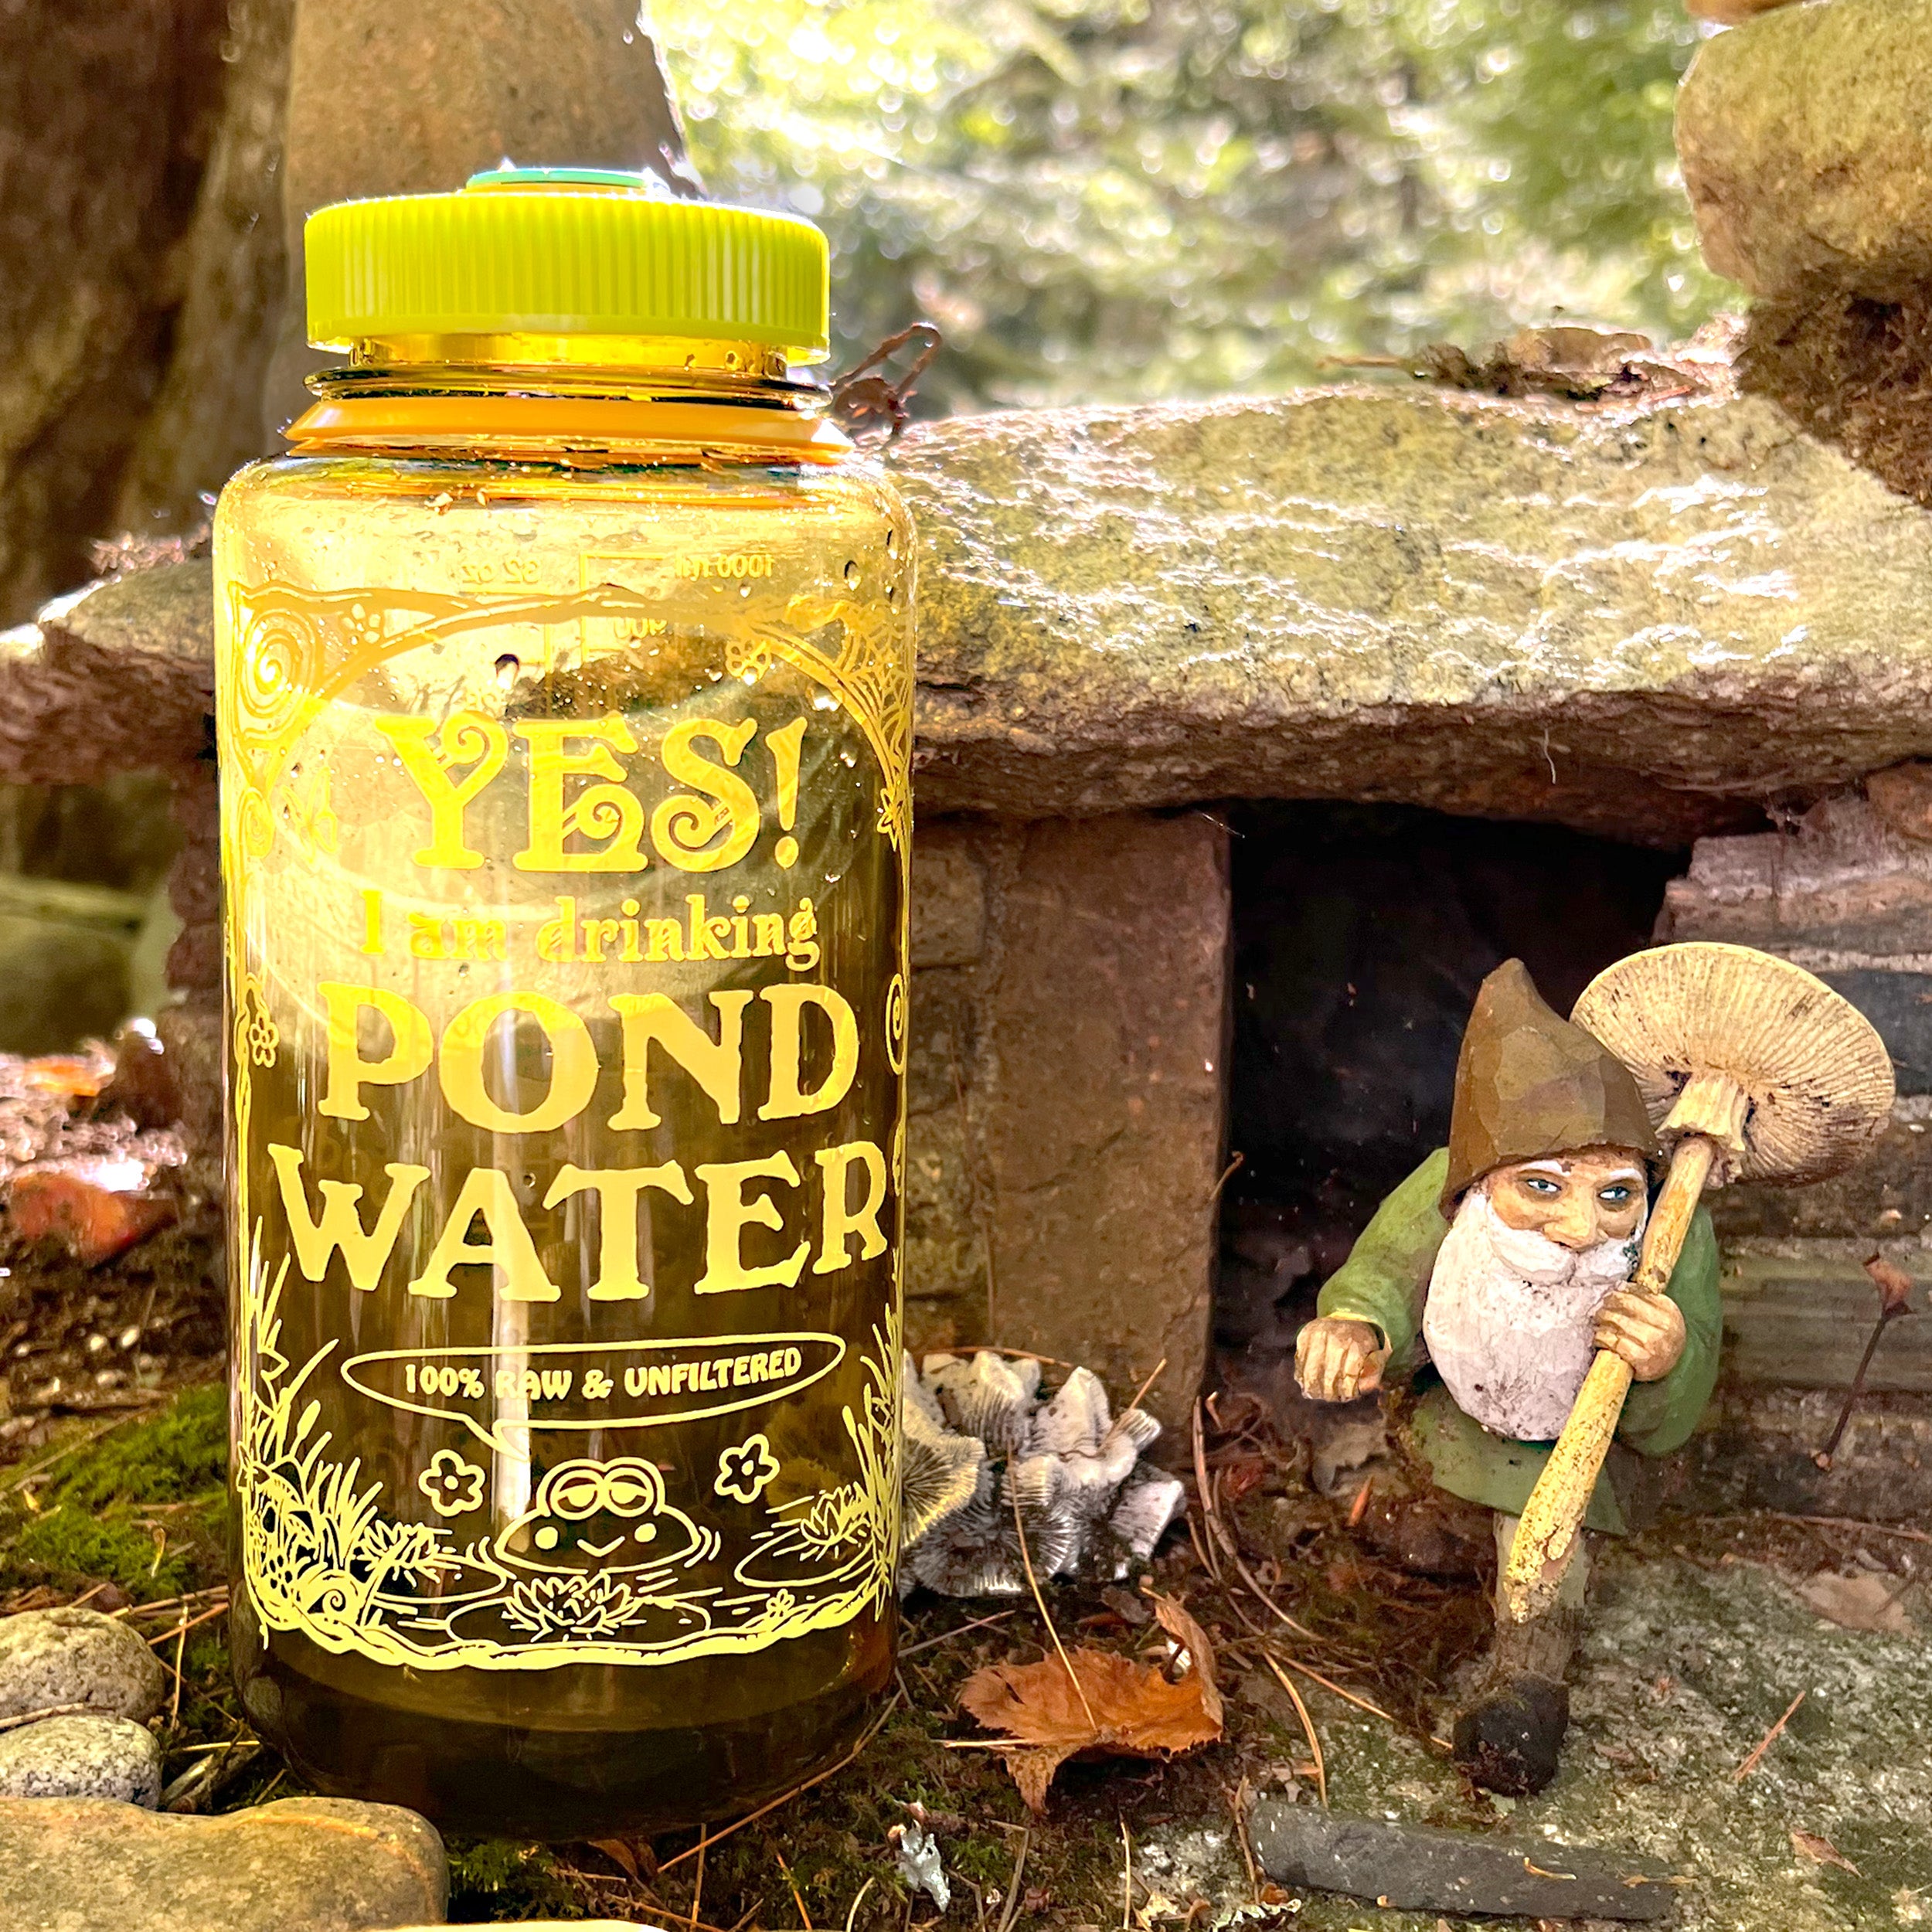 POND WATER BOTTLE BY BEN MARCUS